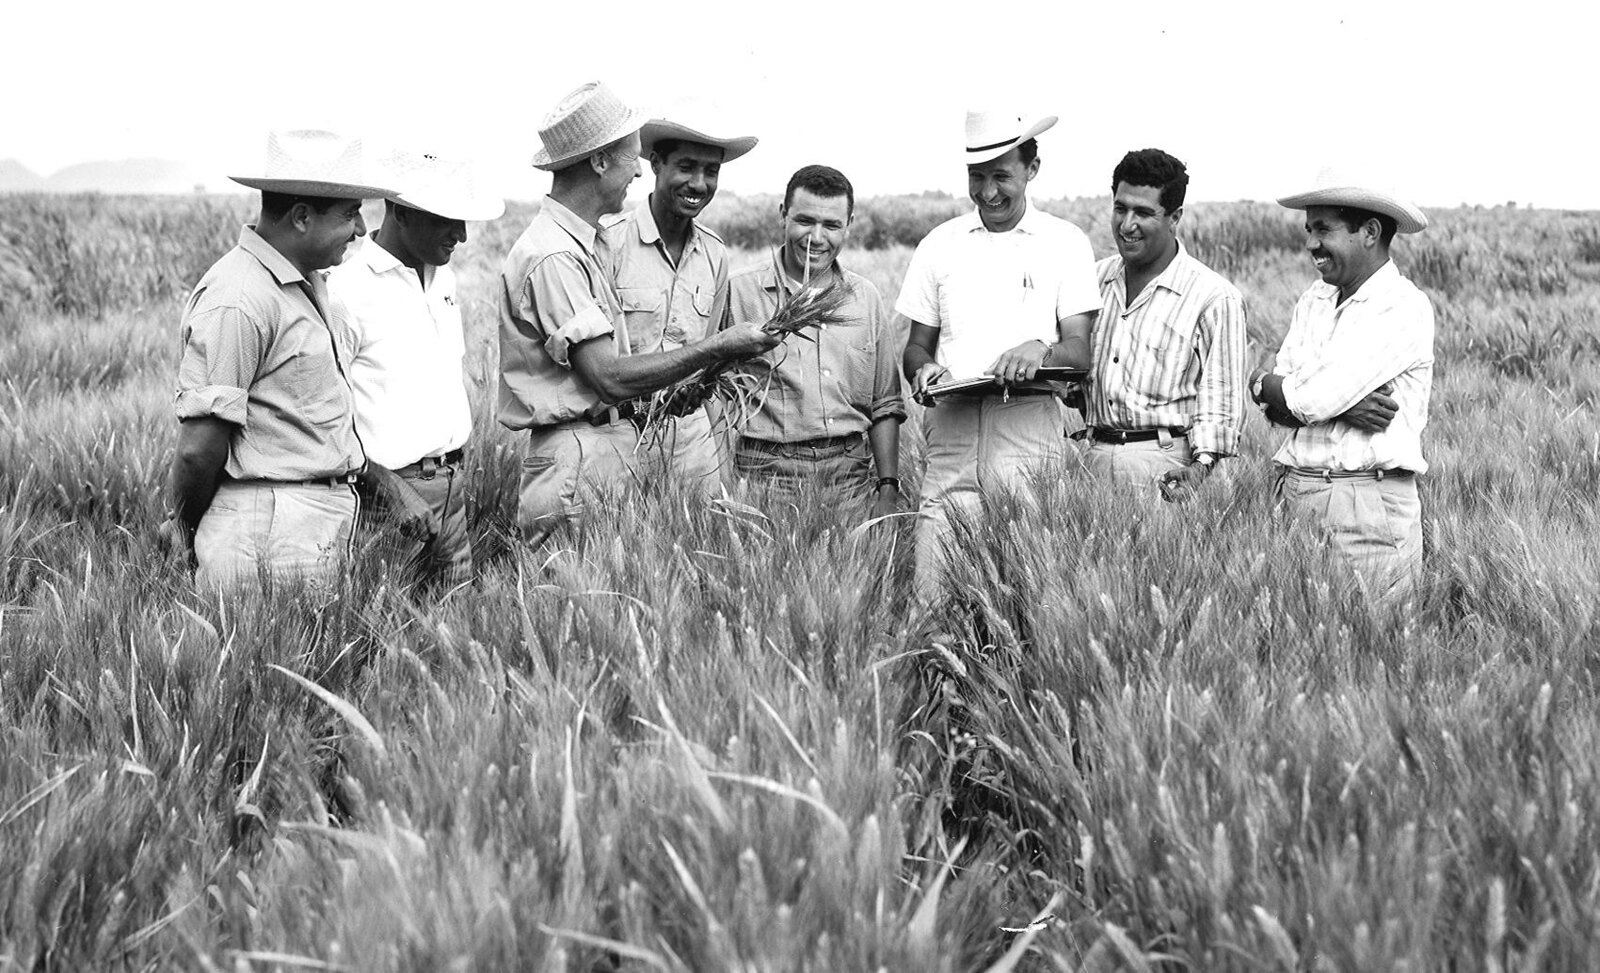 Norman Borlaug in the field teaching a group of young trainees.